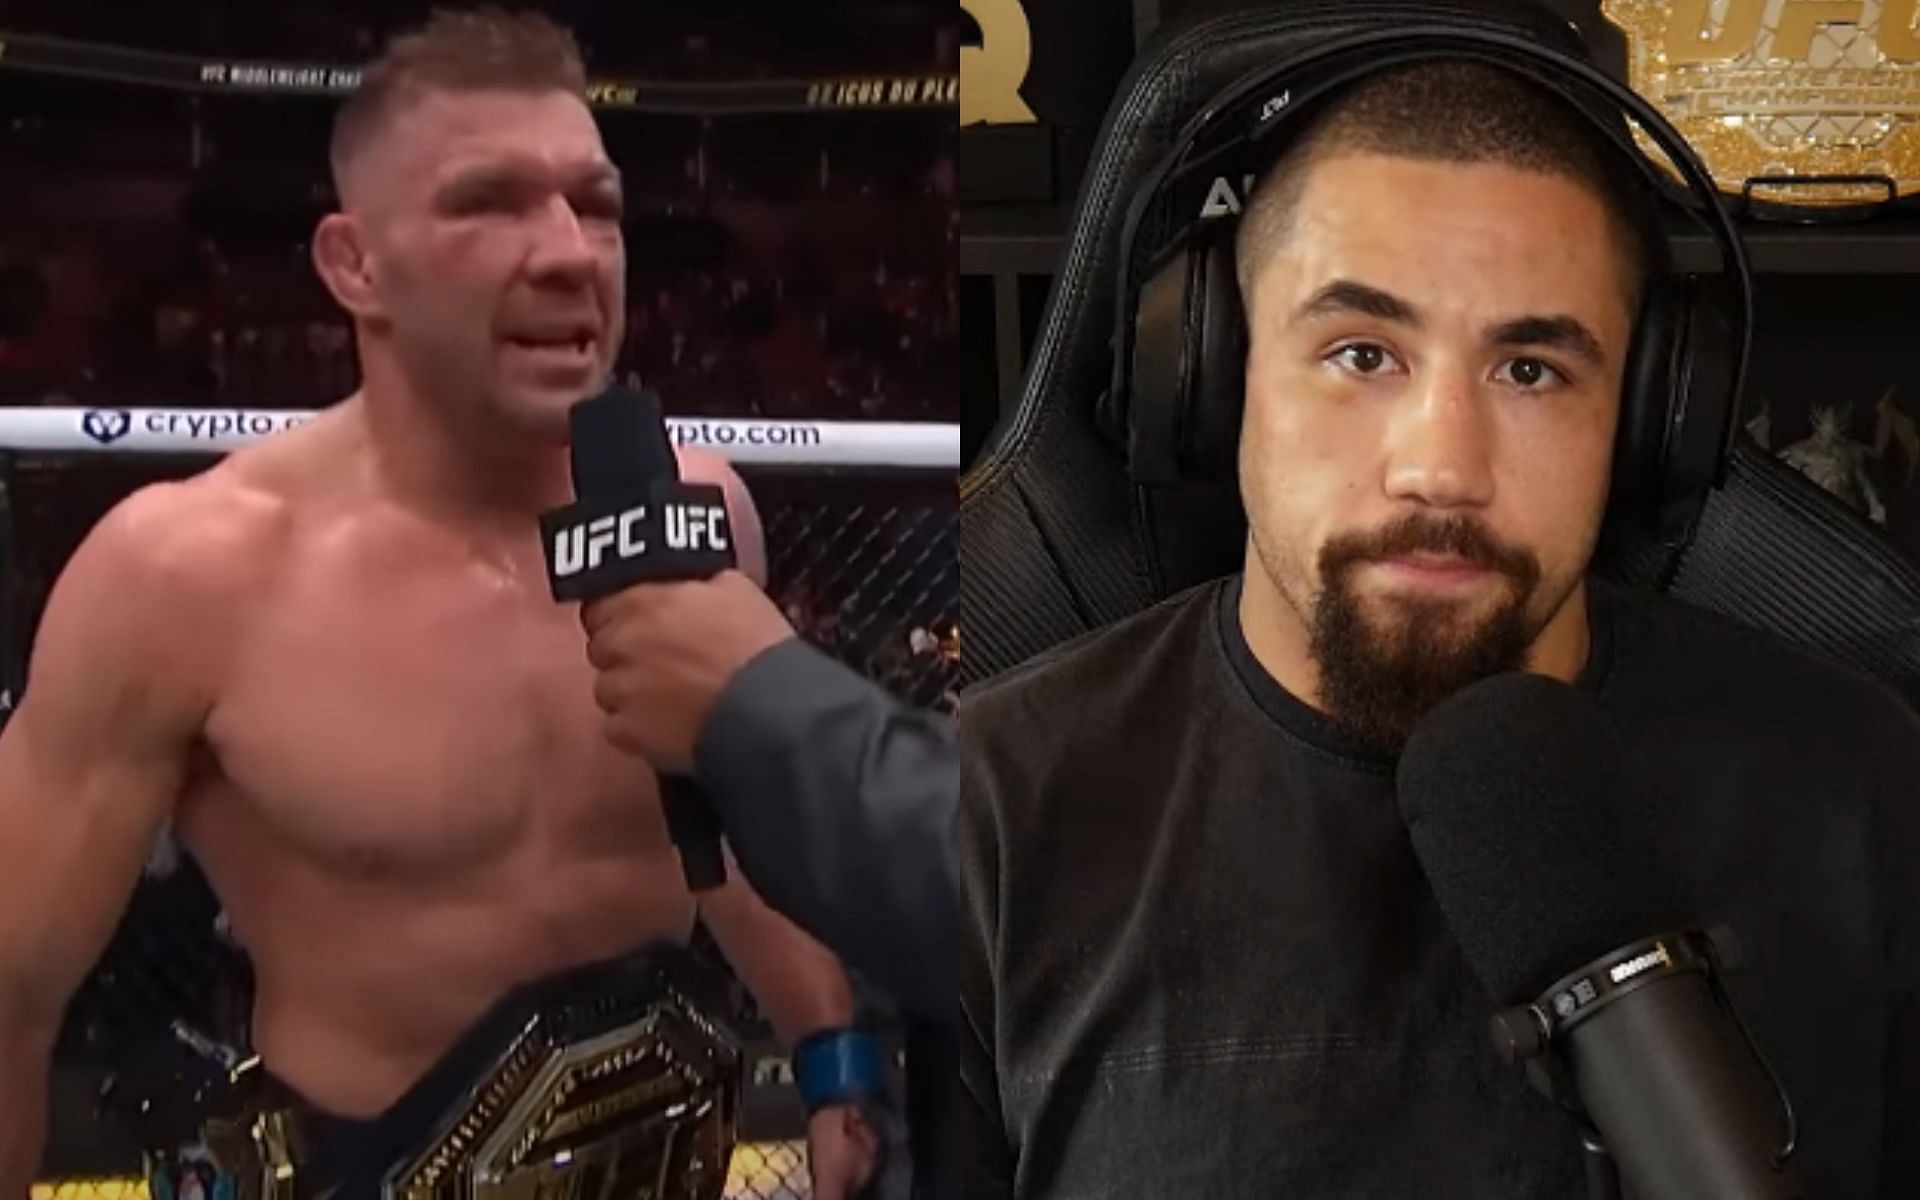 Robert Whittaker [Right] says Dricus du Plessis [Left] impressed him with performance at UFC 297 [Image courtesy: MMArcade Podcast and UFC - YouTube]